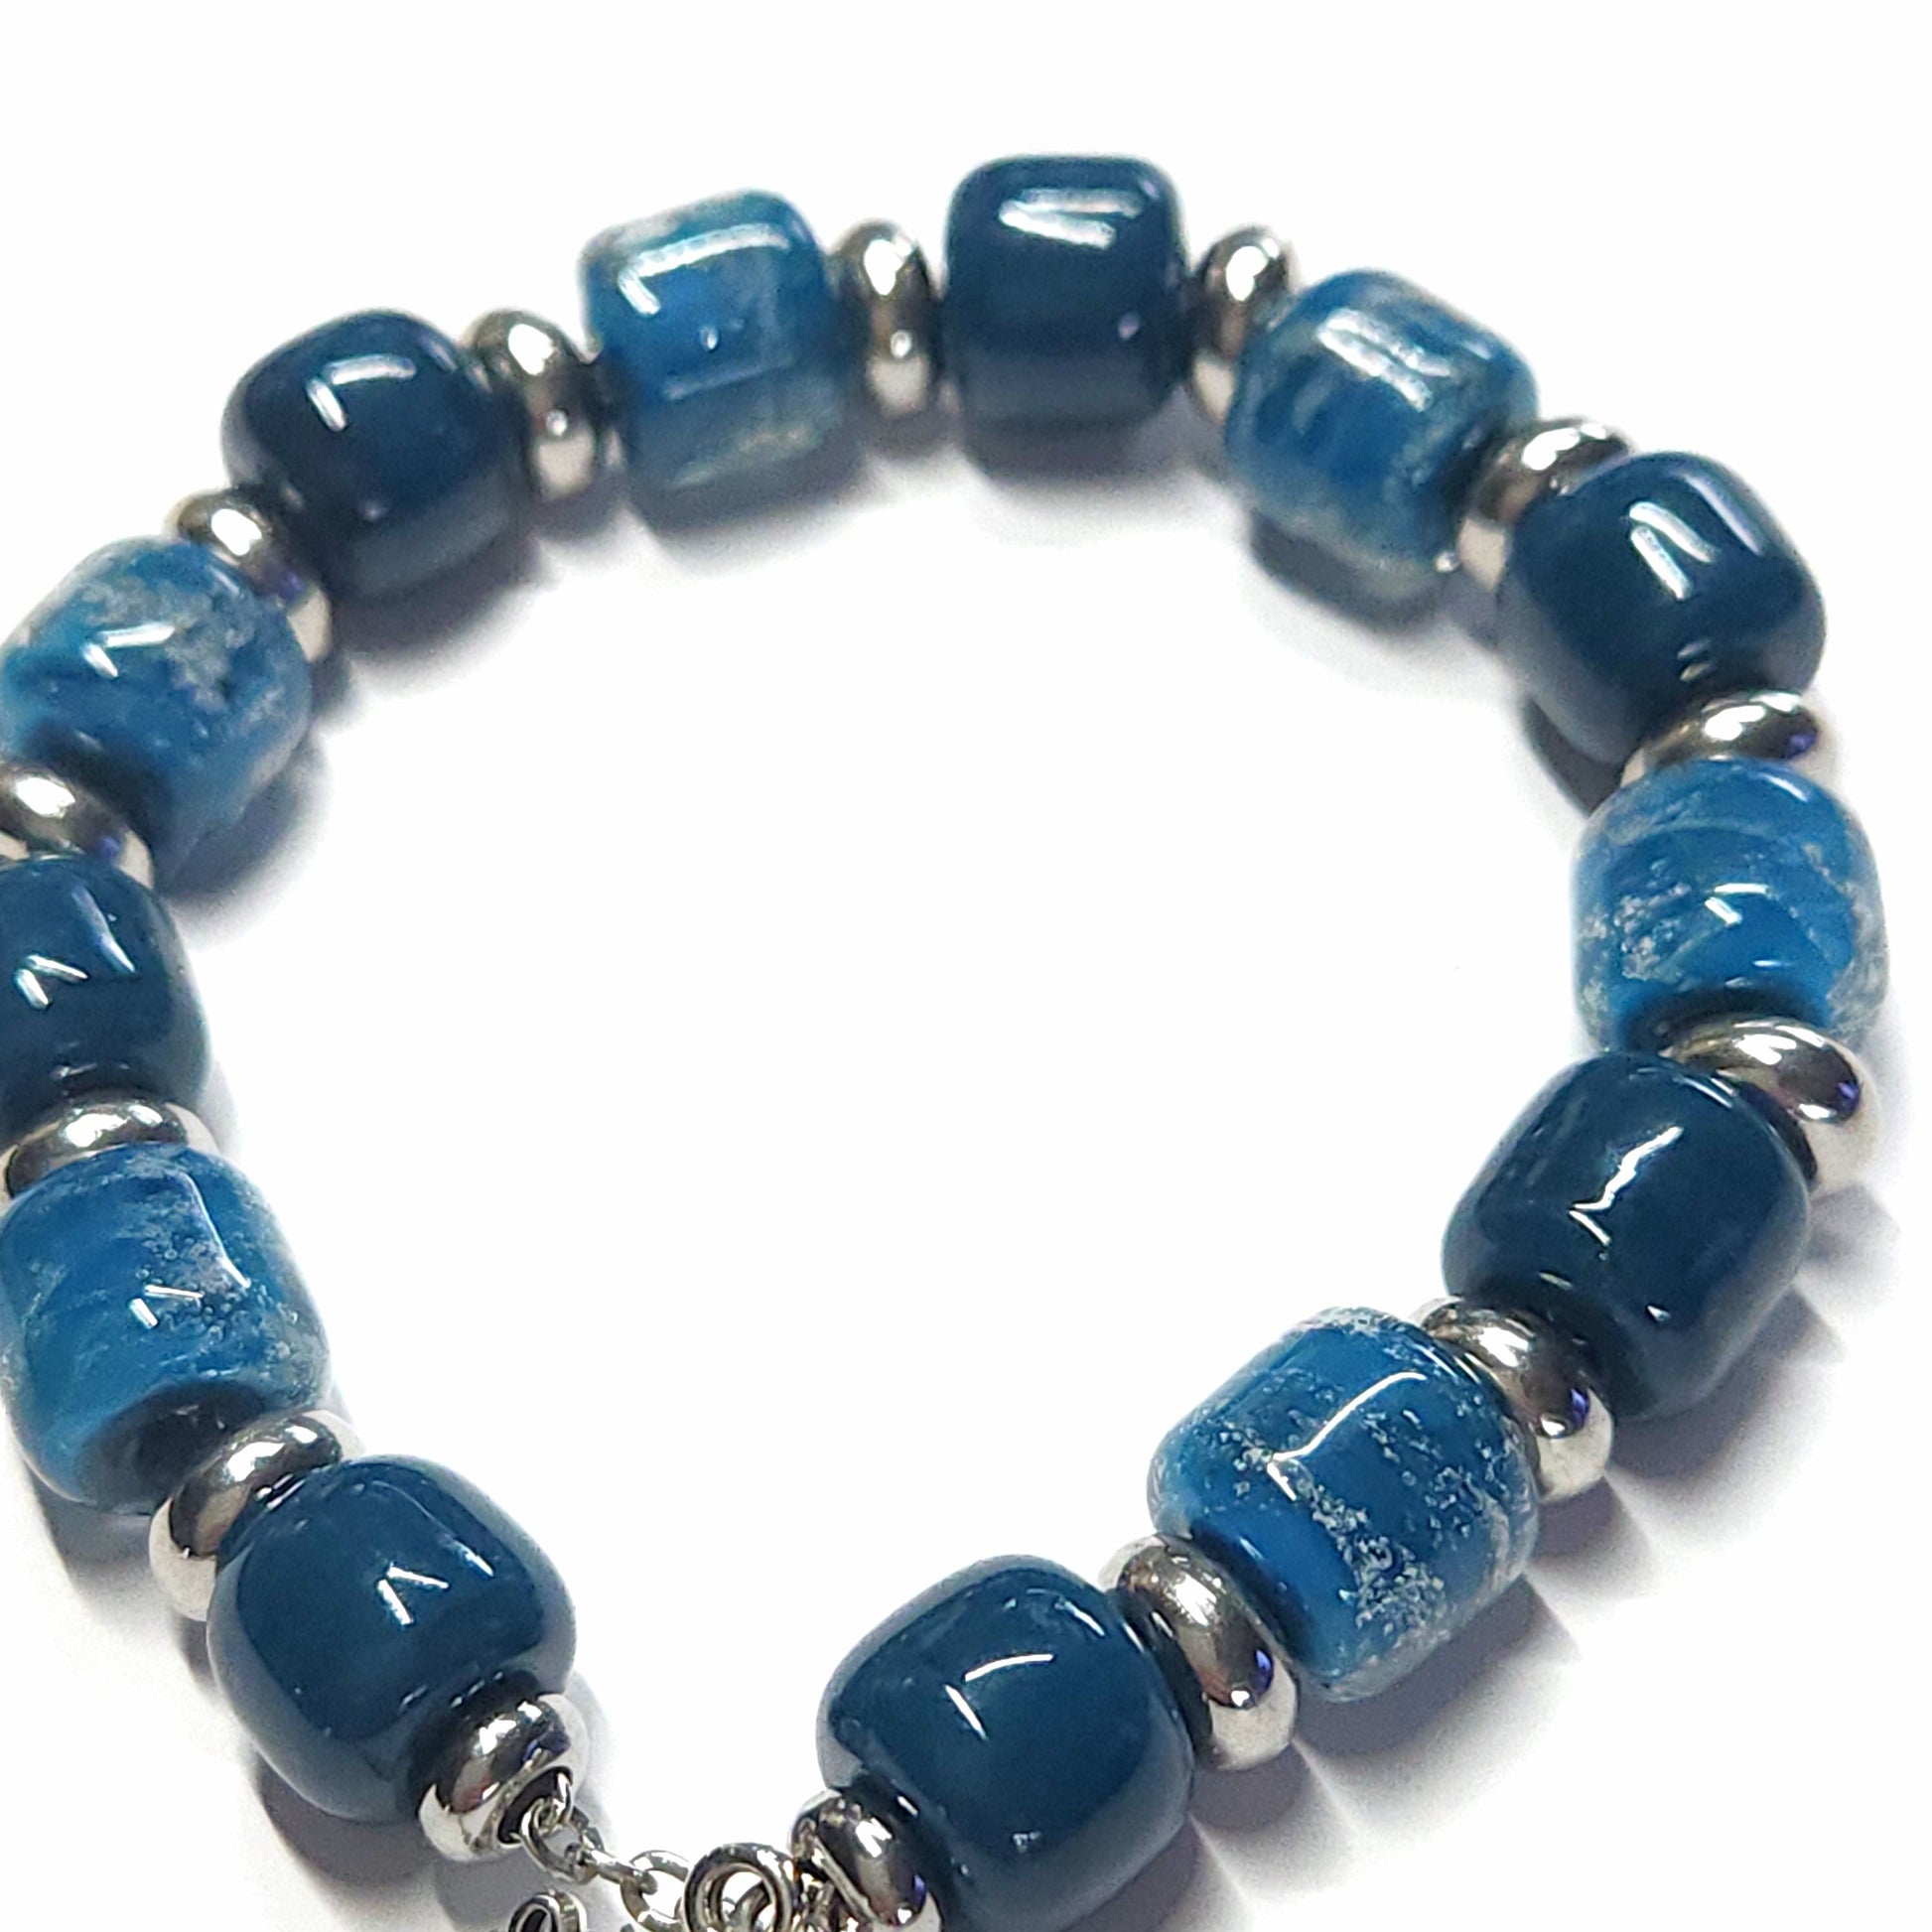 Eternal Cremation Bracelet With 6 Ash Beads - Silver-Cremation Beads-DragonFire Glass-Ocean Blue-DragonFire Glass Cremation Jewelry